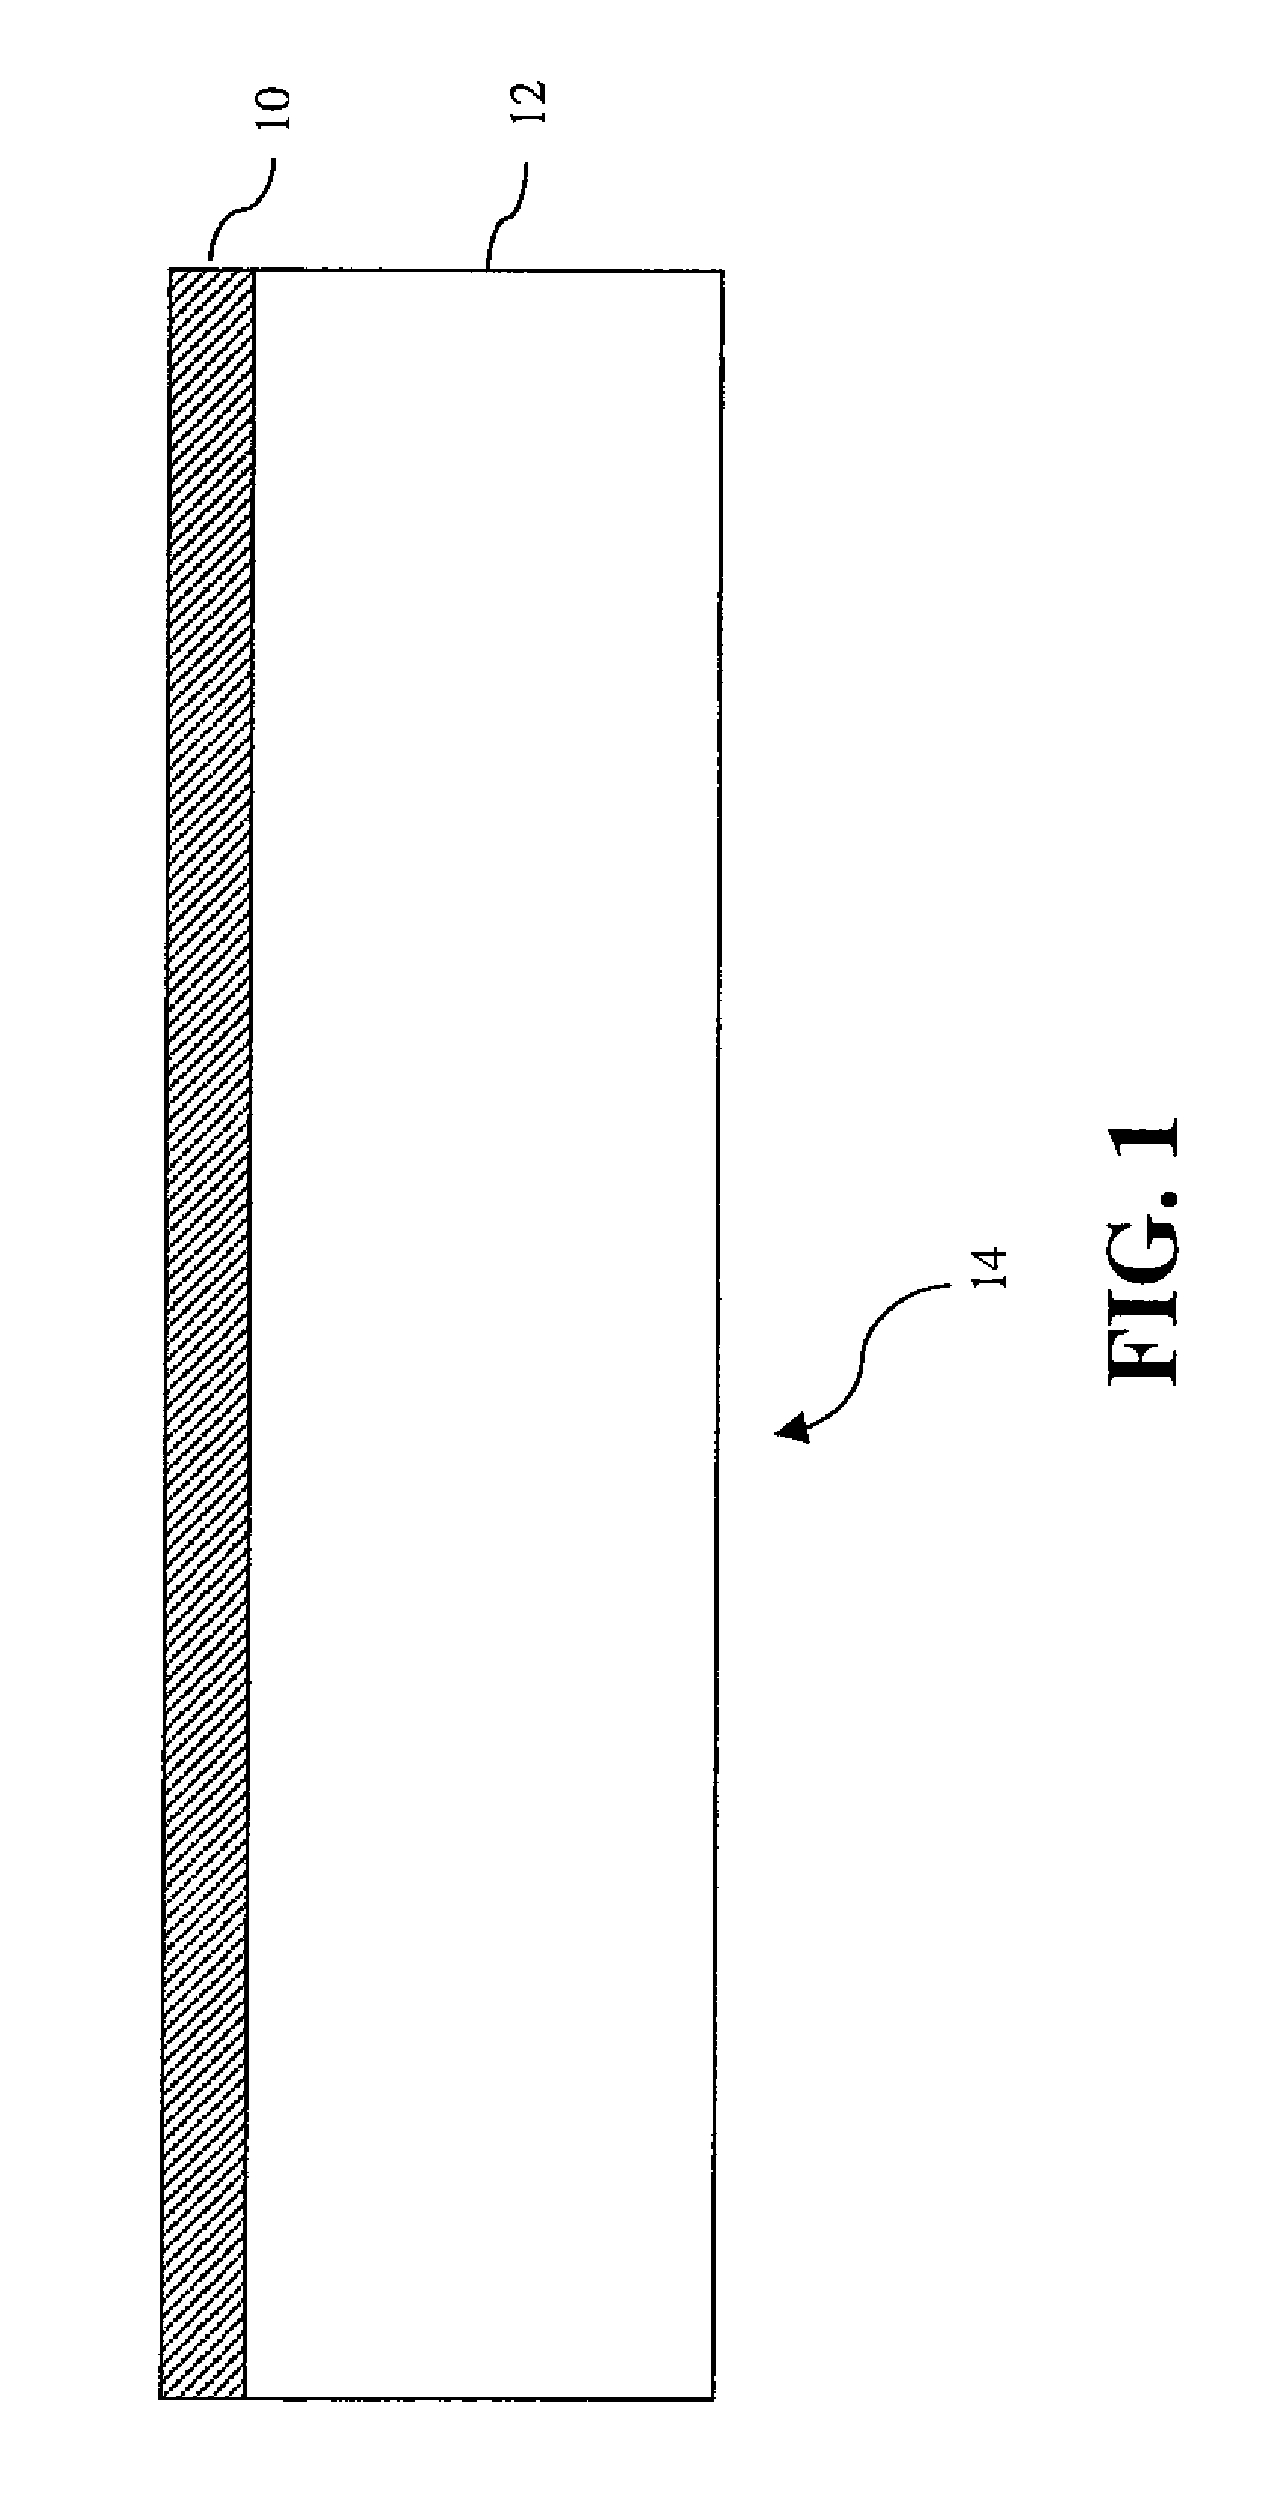 Polymeric conductor donor and transfer method